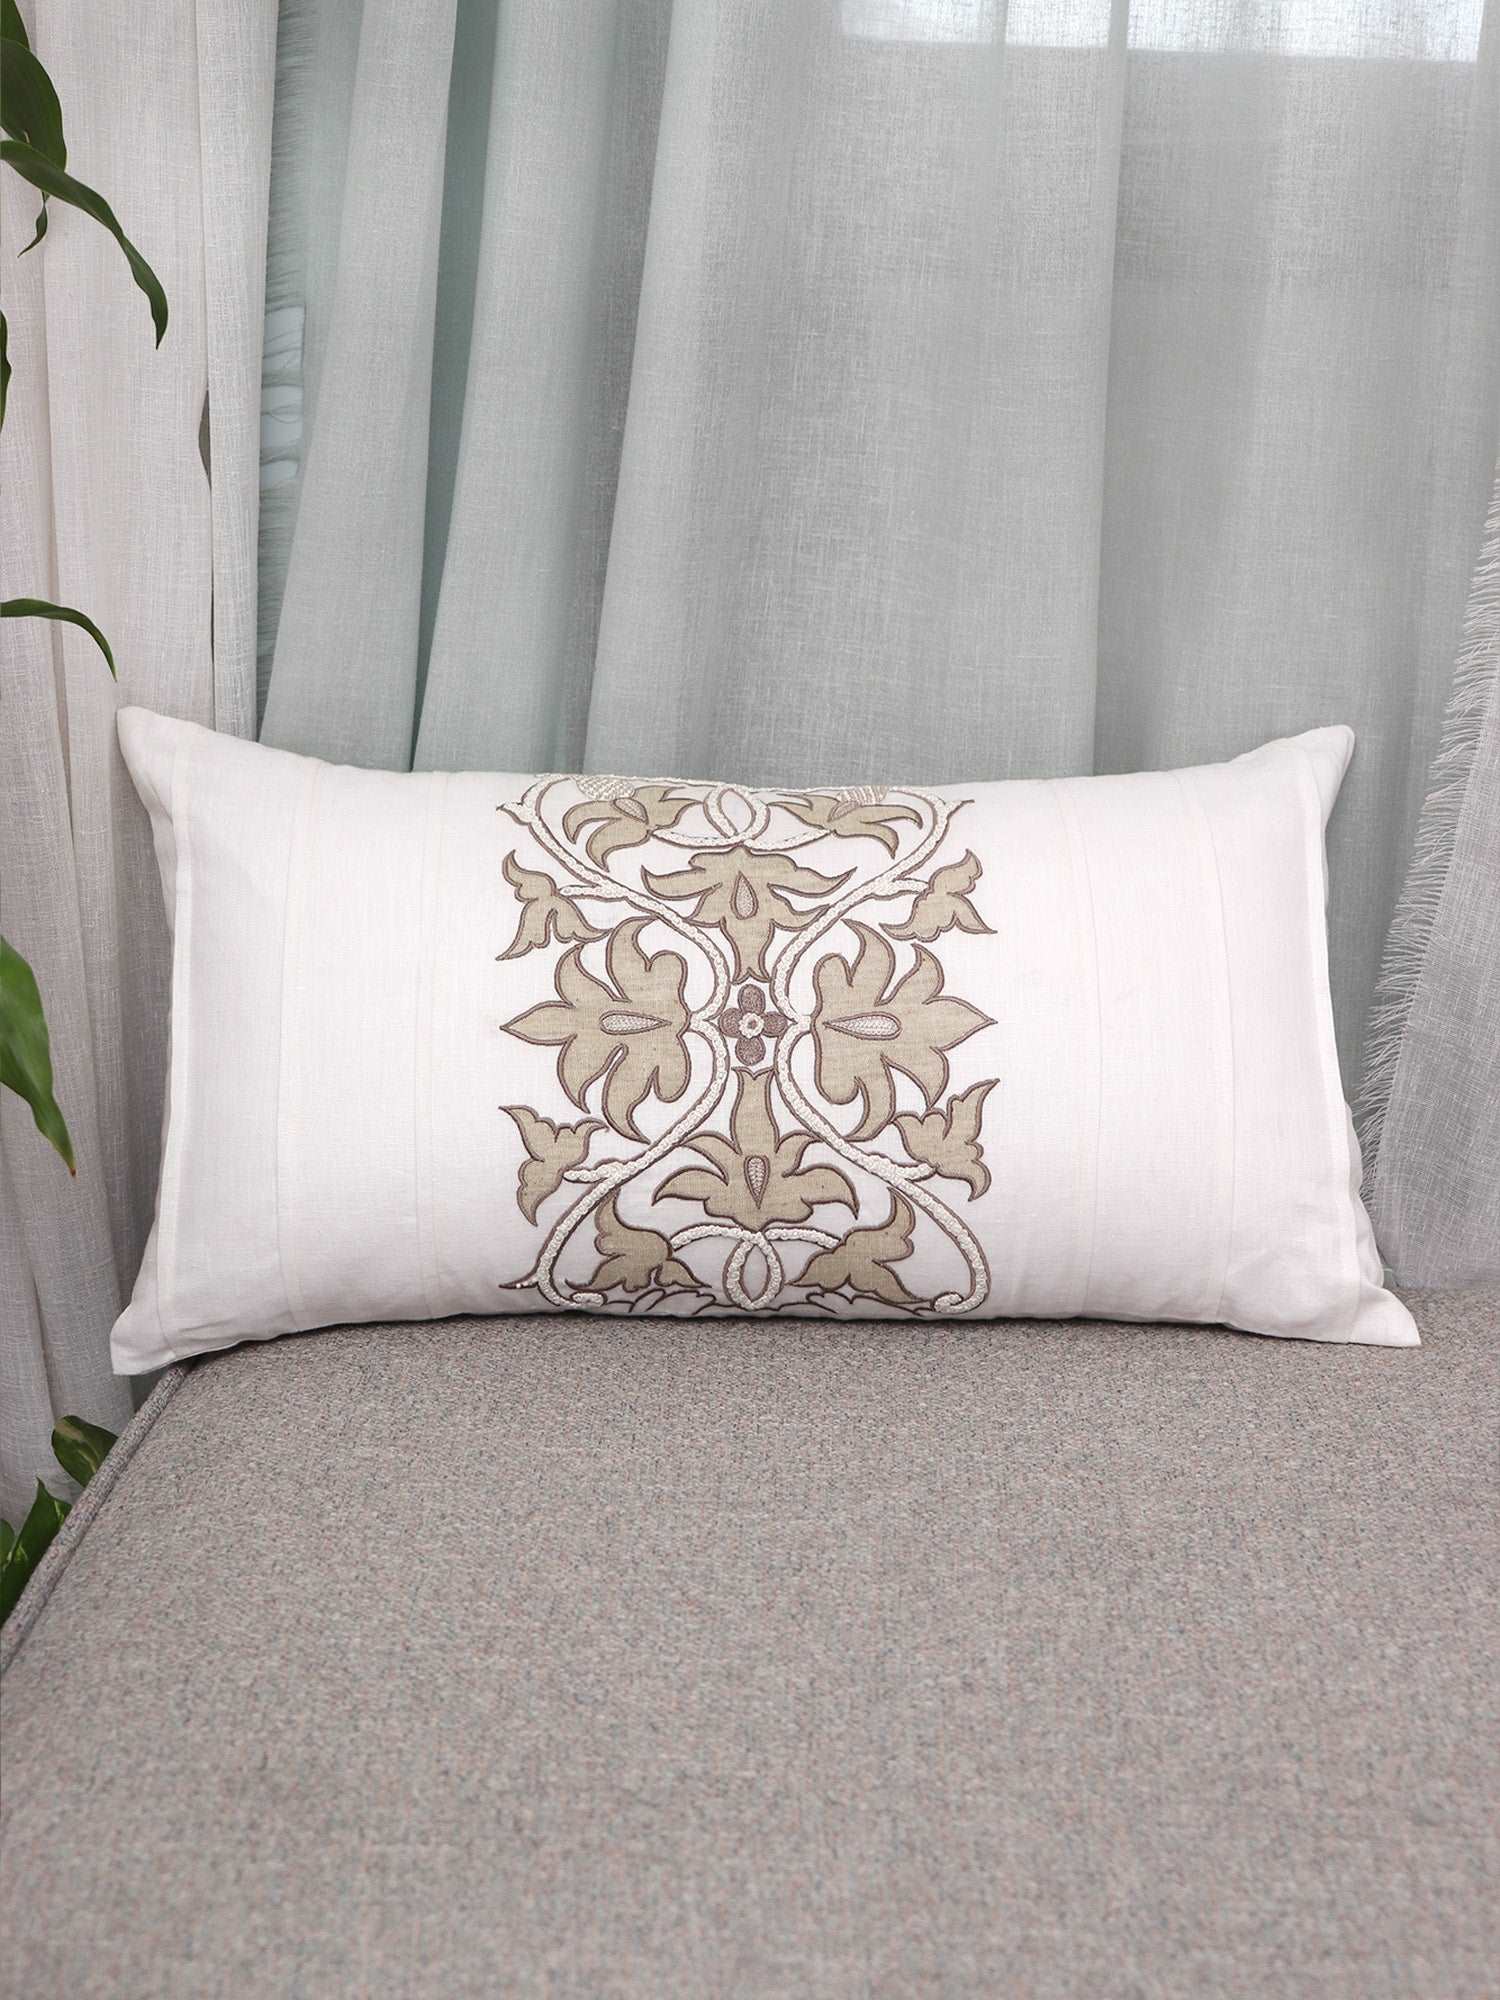 Cushion Cover Cotton with Applique, Machine Embroidery and Handwork & Pleats in White-  12x22inches 